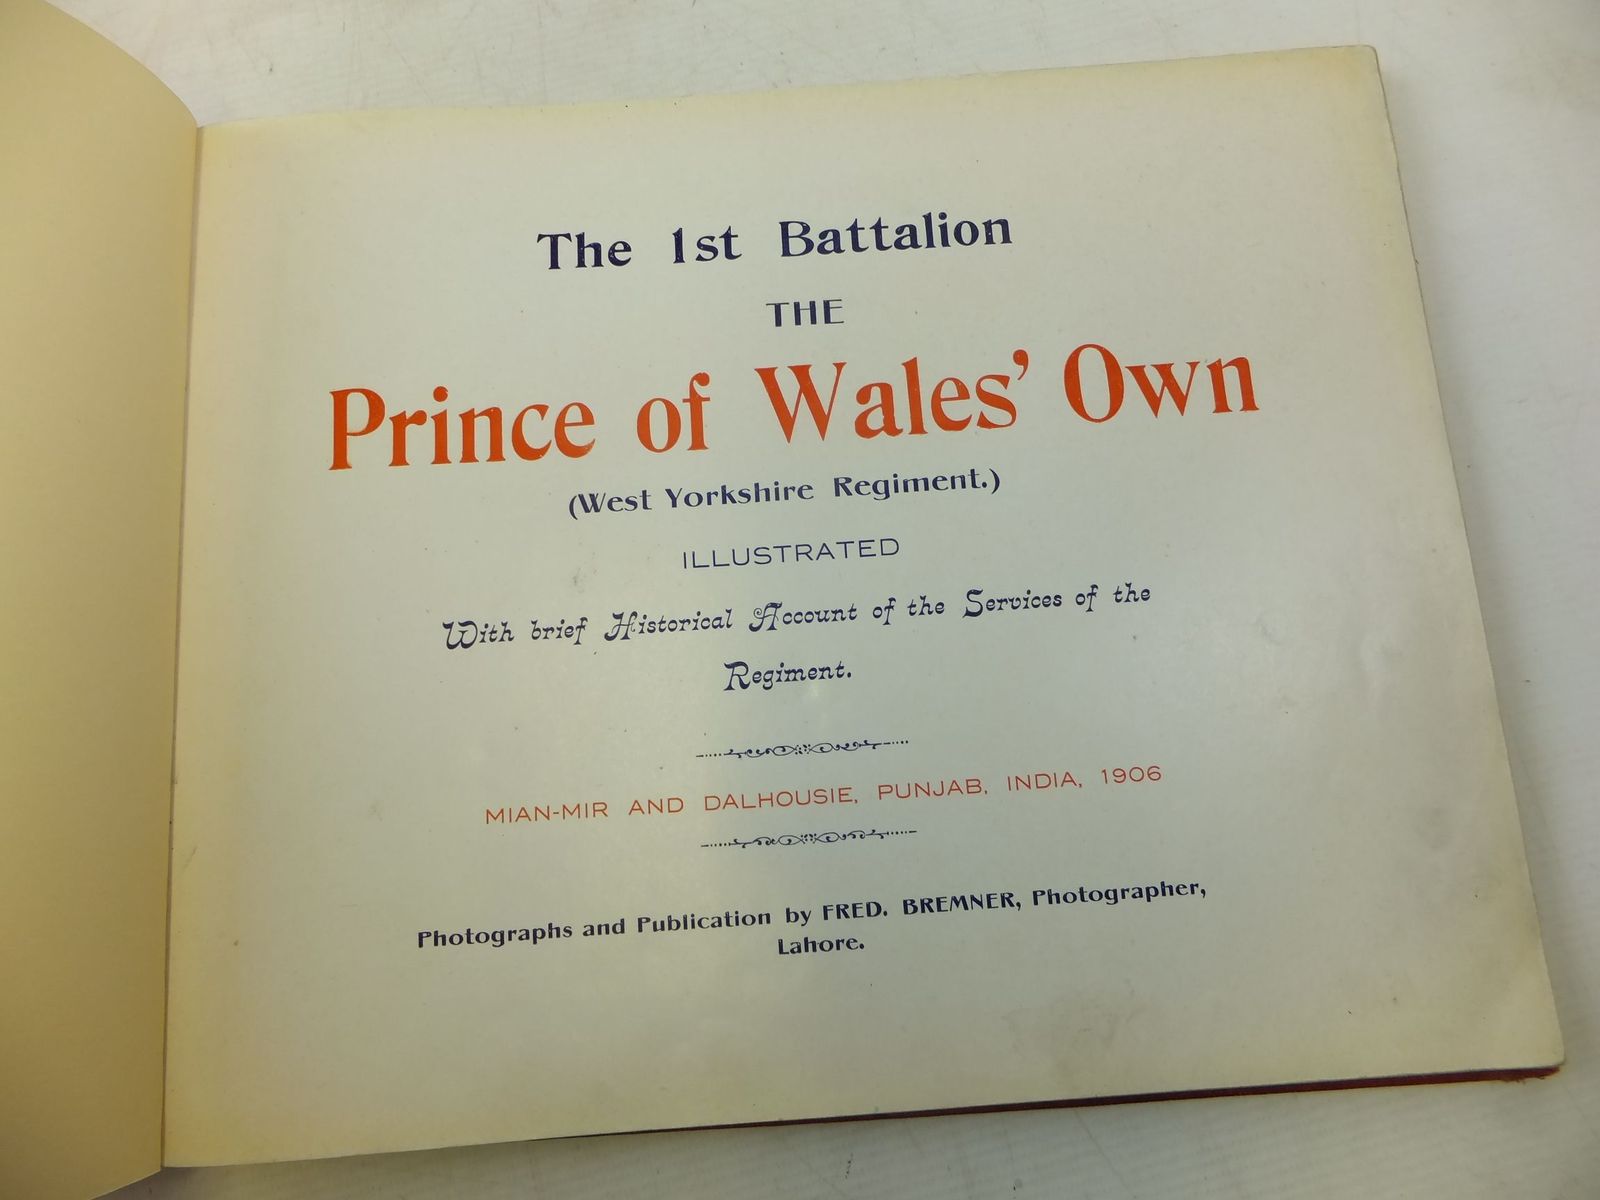 Stella & Rose's Books : THE 1ST BATTALION THE PRINCE OF WALES' OWN ...